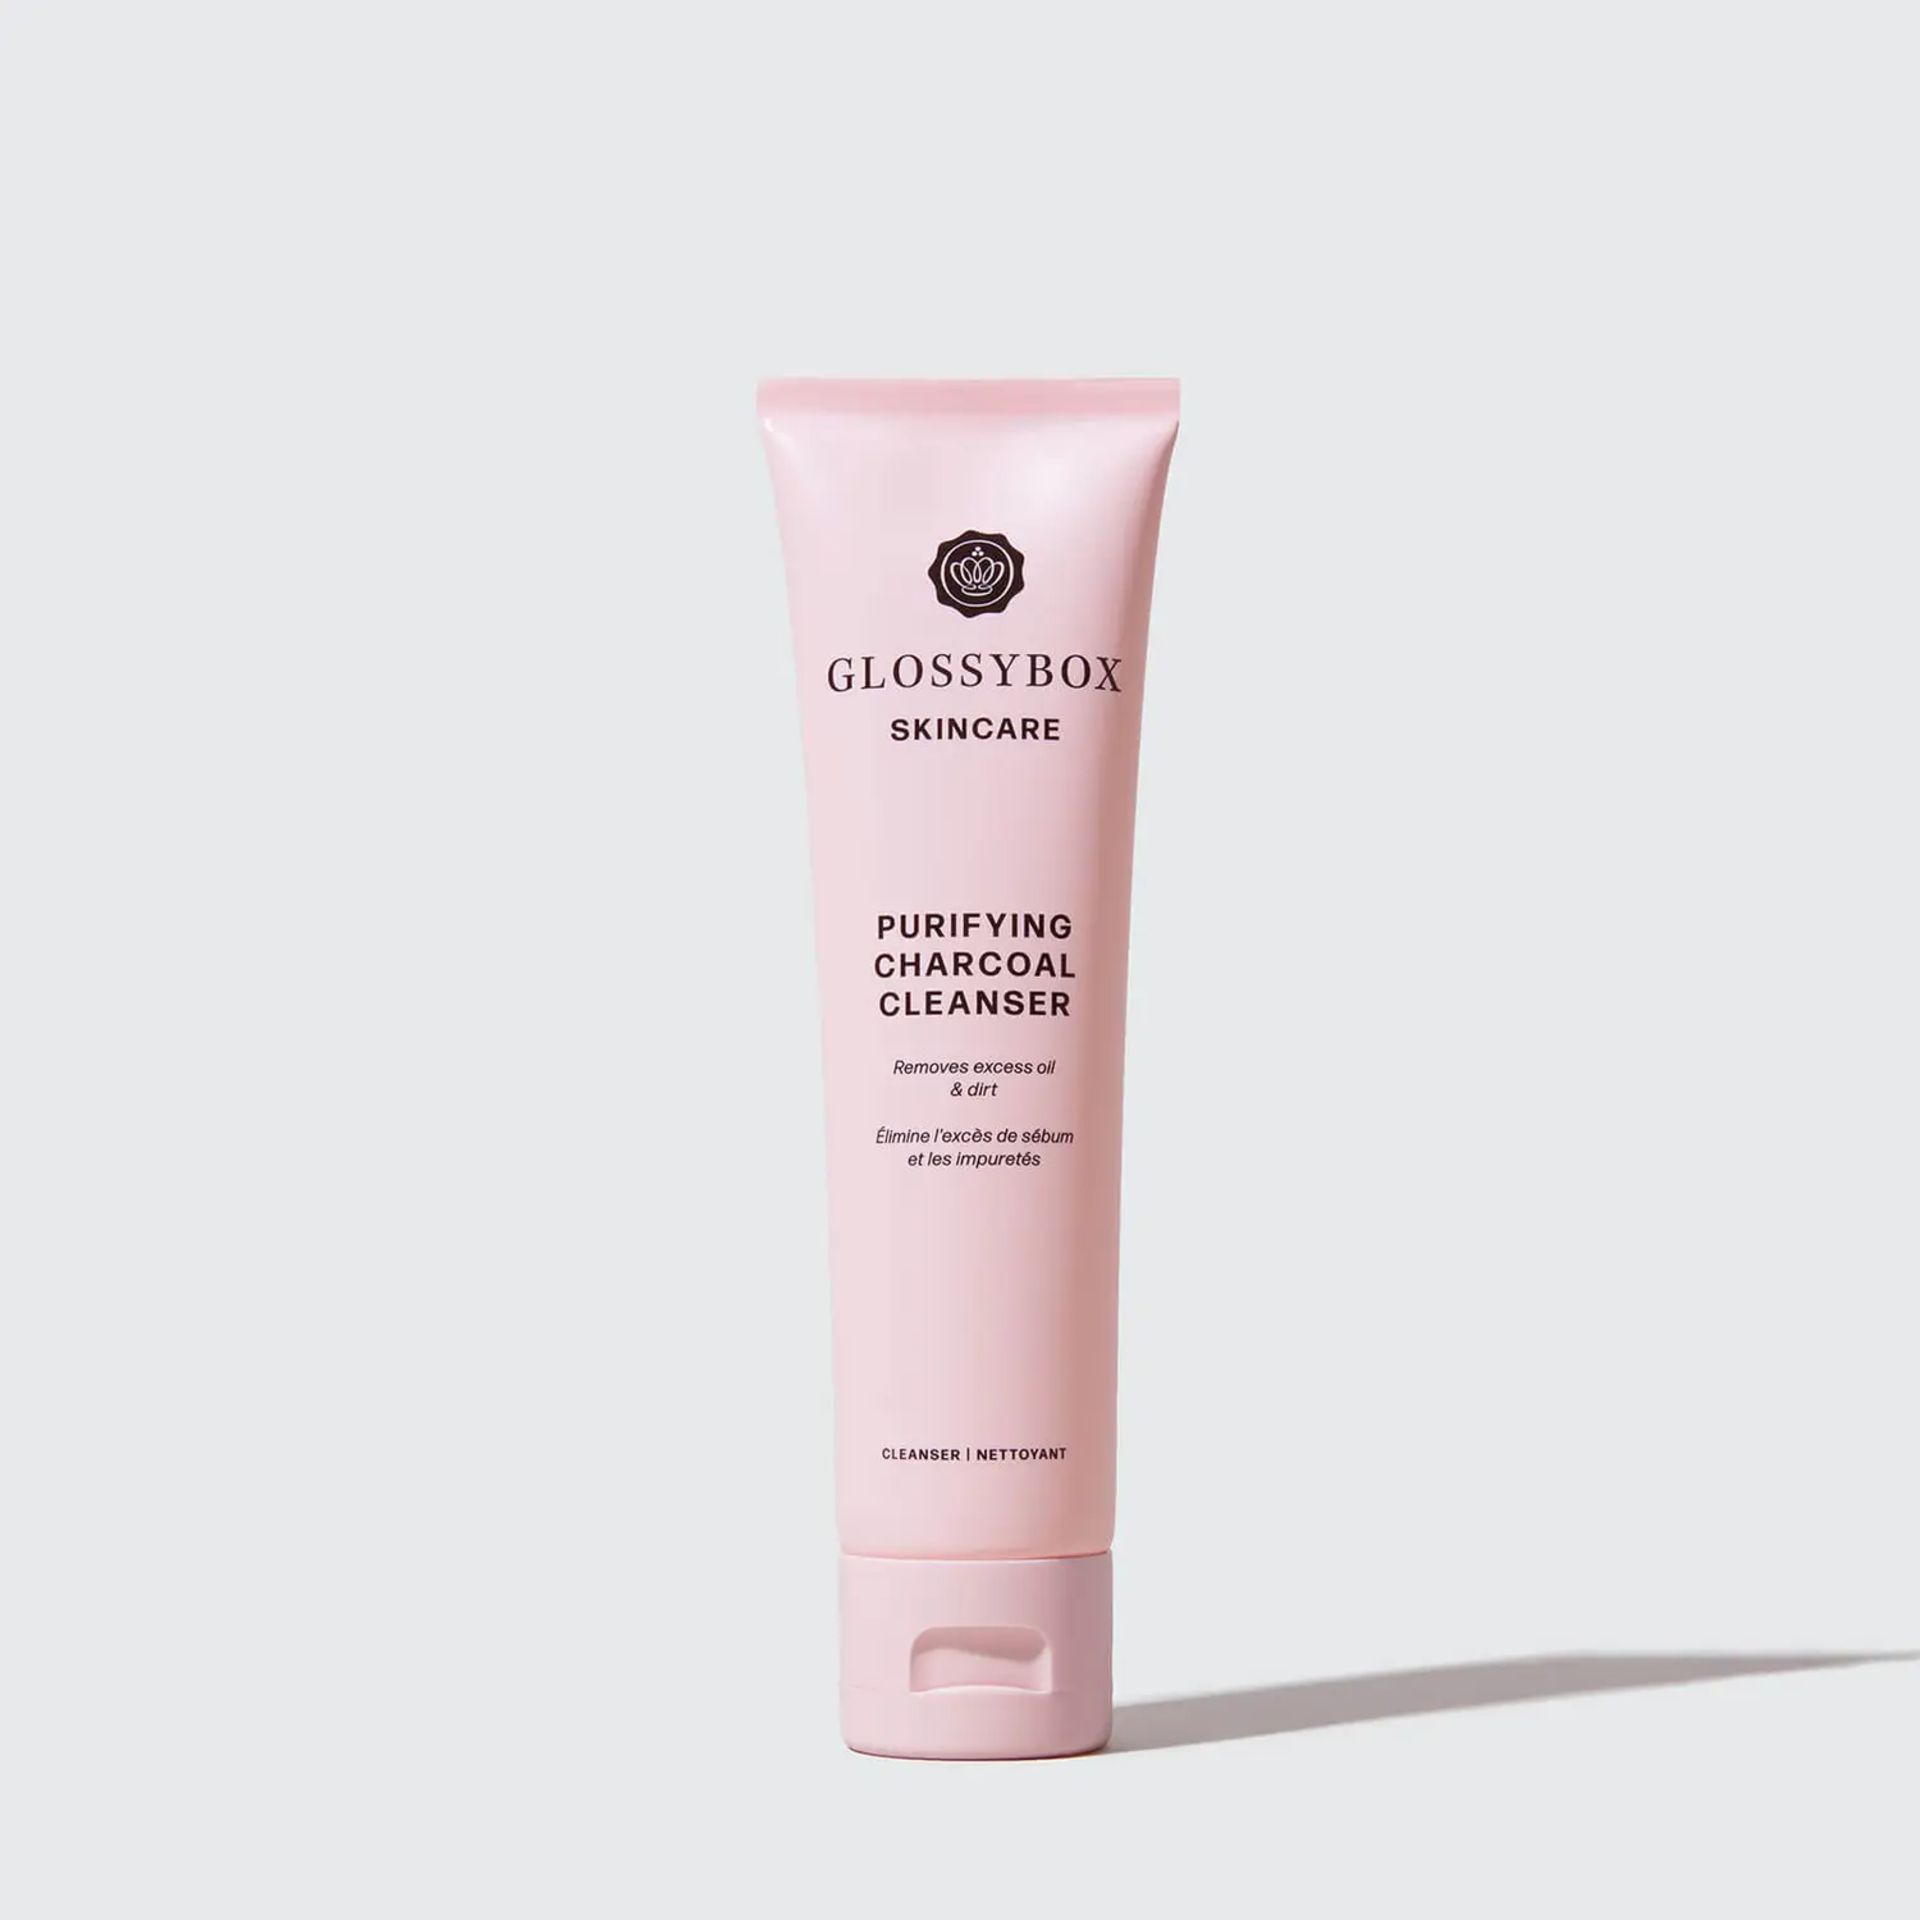 24 x Glossybox Purifying Charcoal Cleanser RRP £312